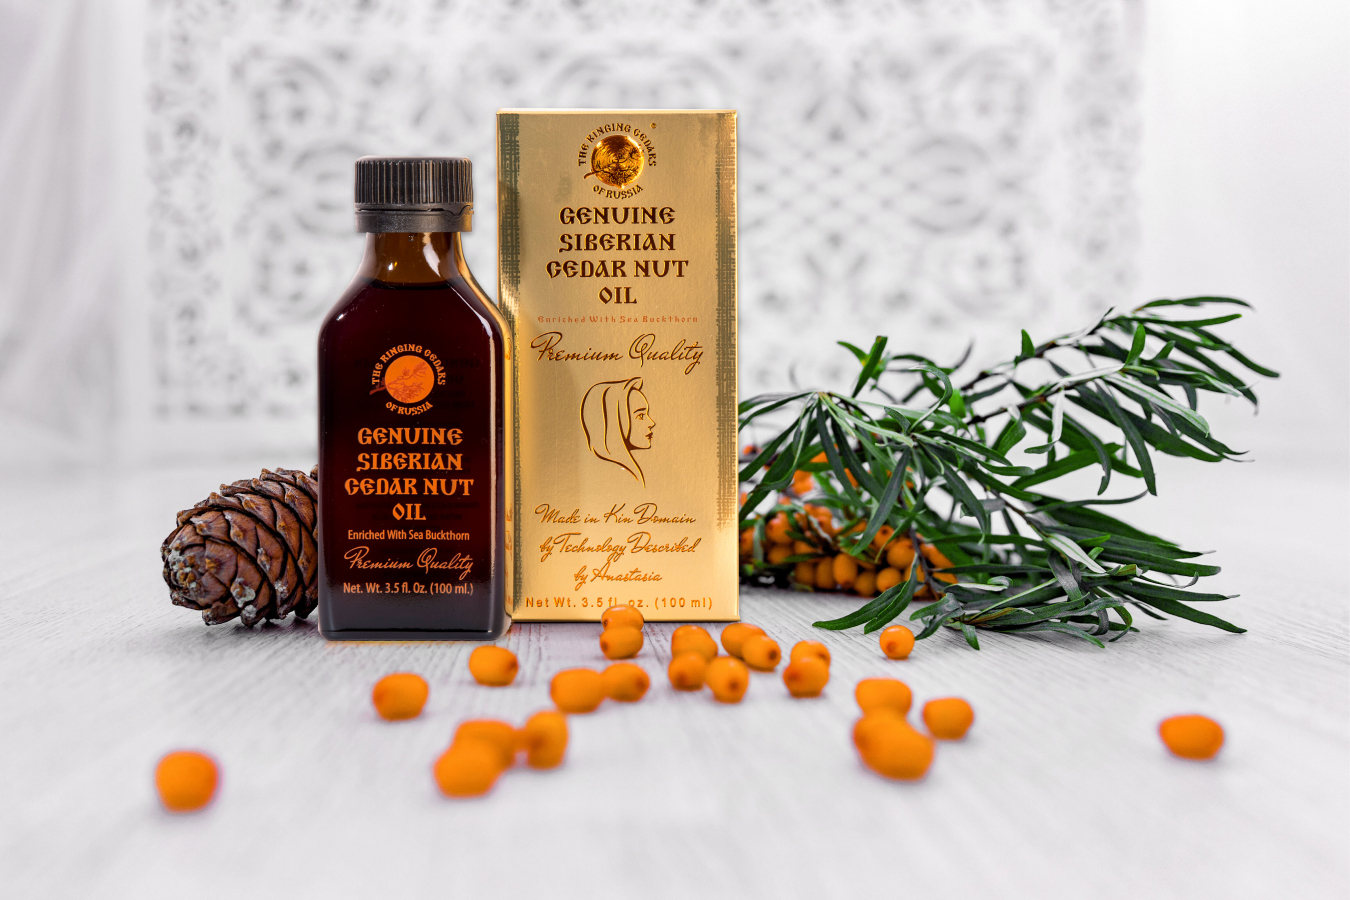 Cedar nut oil enriched with sea buckthorn prevents the development of metabolic diseases